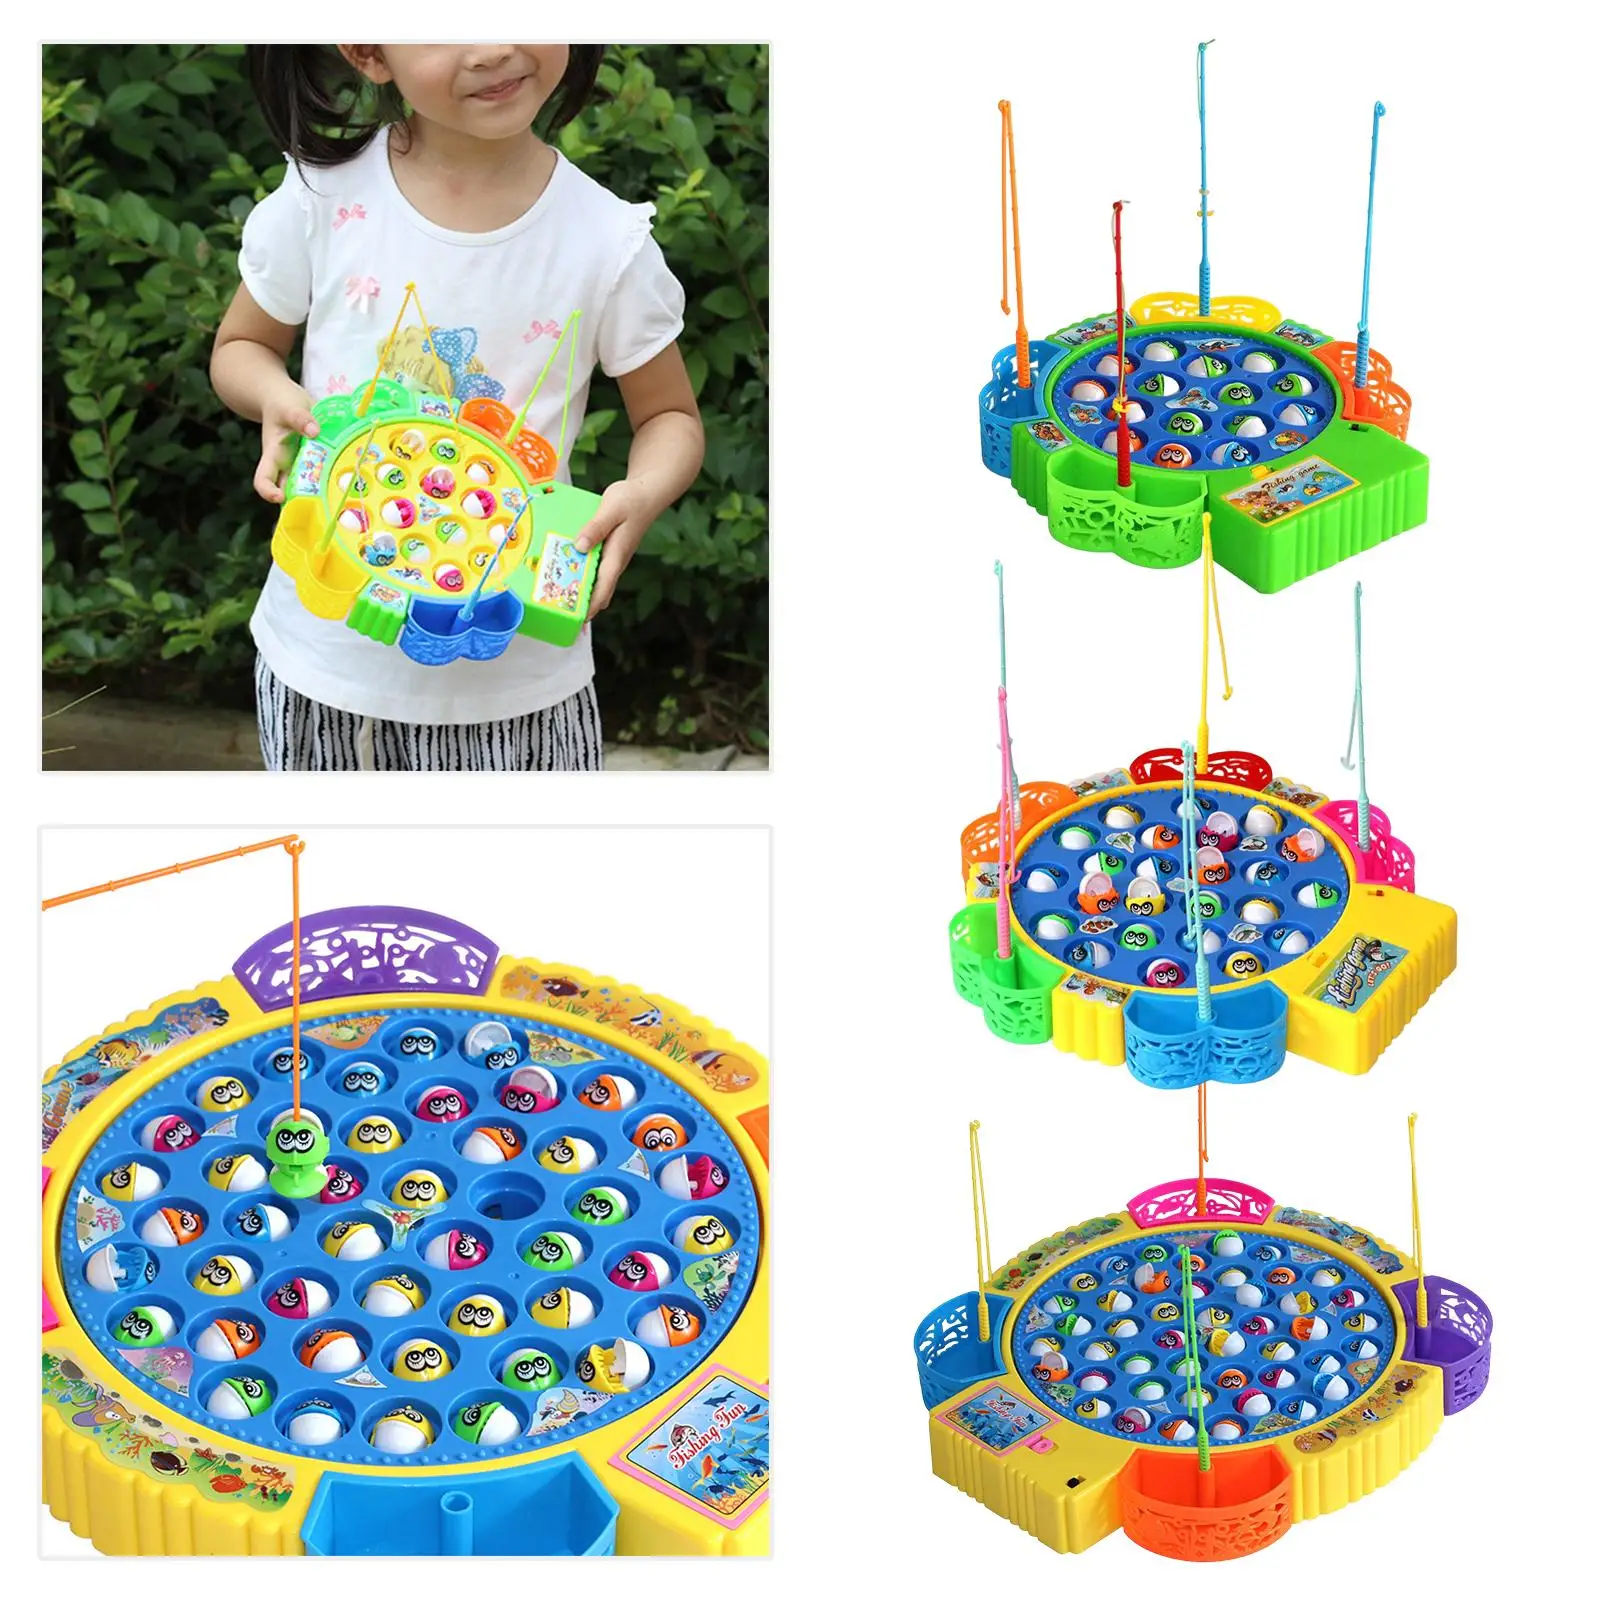 toysmalle Rotating Fishing Game Kids Toy Ability training, board Game for